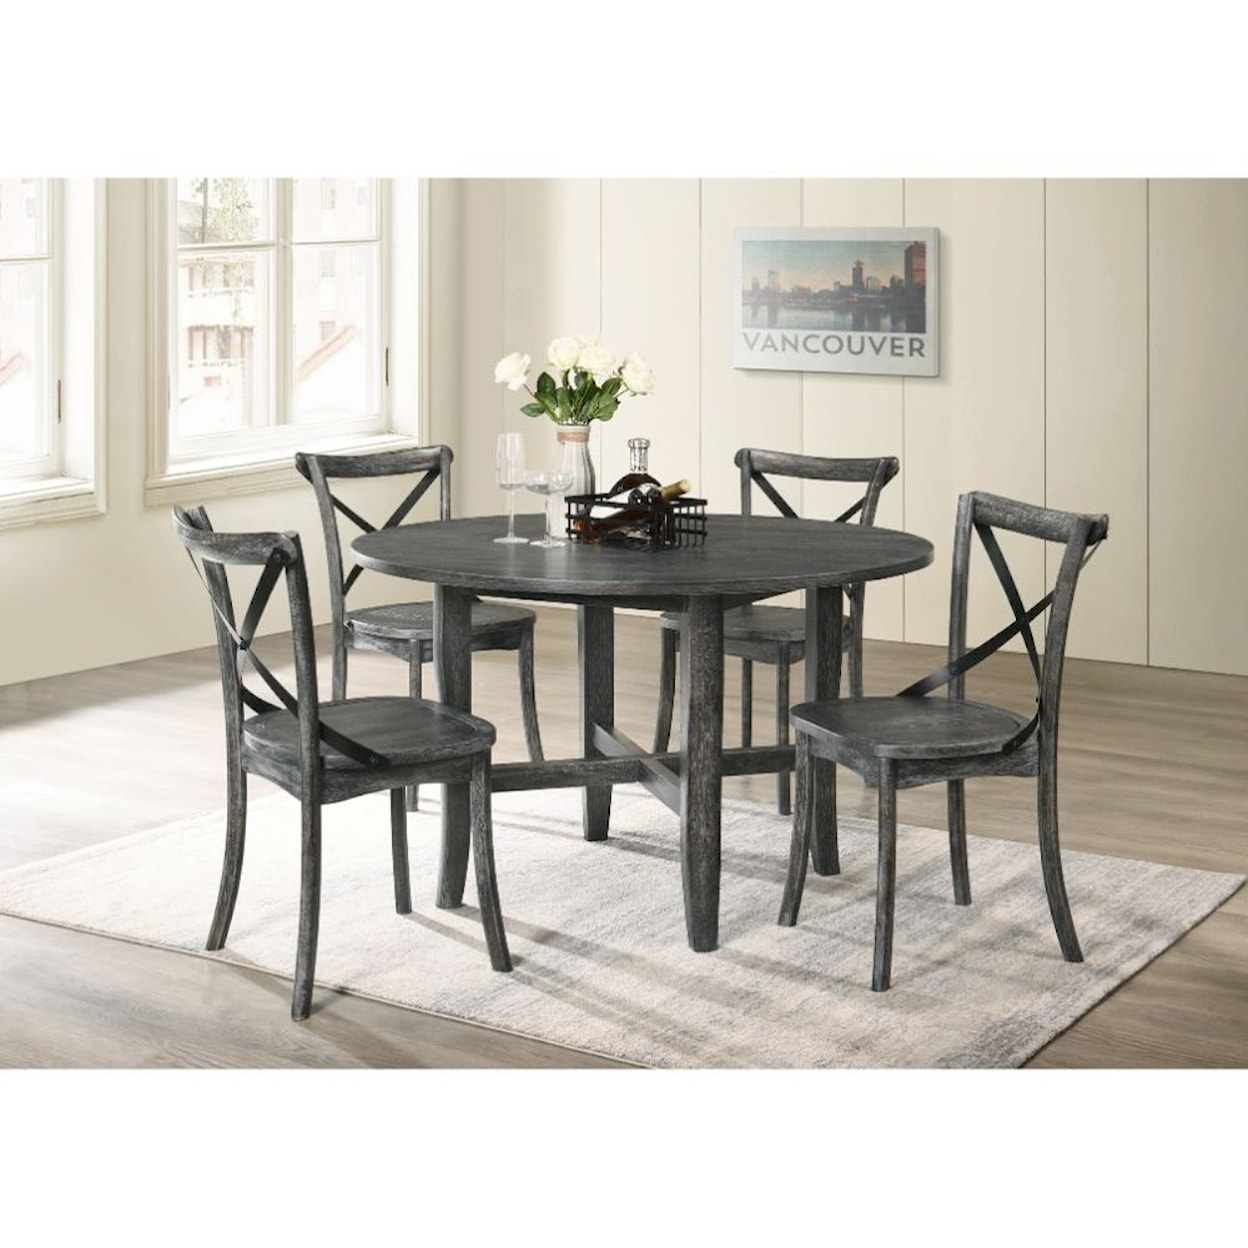 Acme Furniture Kendric 5-Piece Table and Chair Set